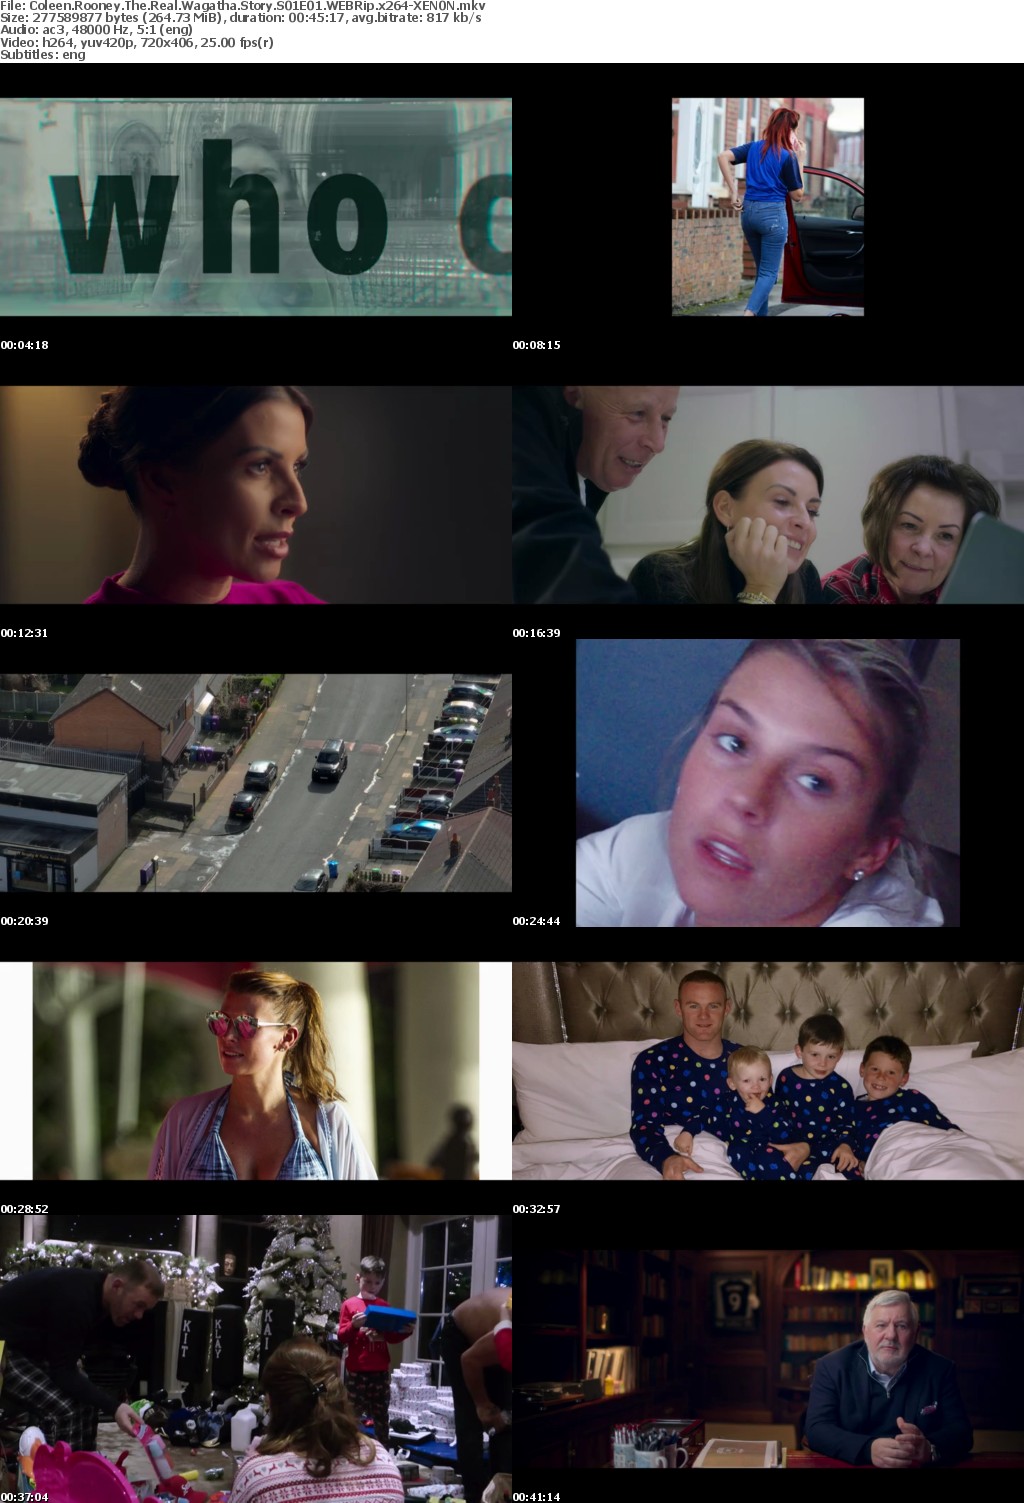 Coleen Rooney The Real Wagatha Story S01E01 WEBRip x264-XEN0N Saturn5